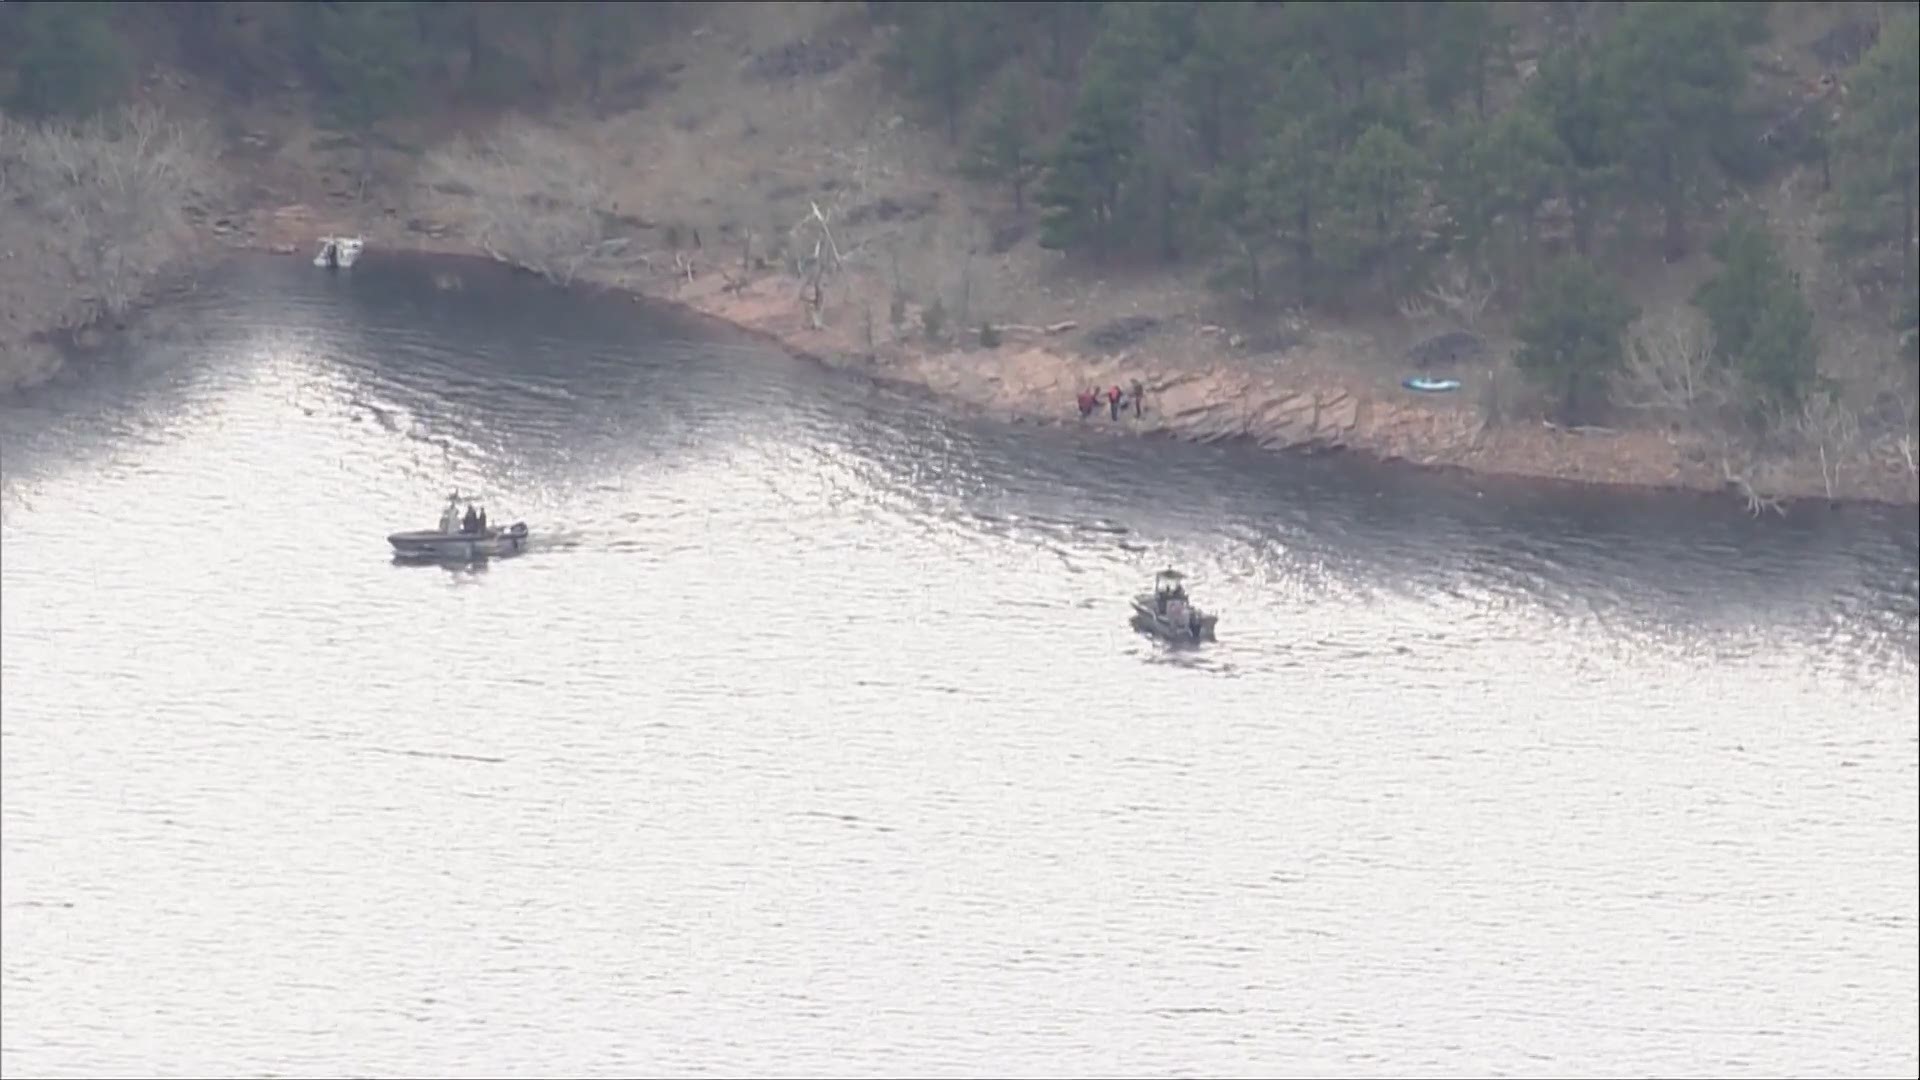 The search began after an overturned kayak was found around 2 p.m. Sunday.